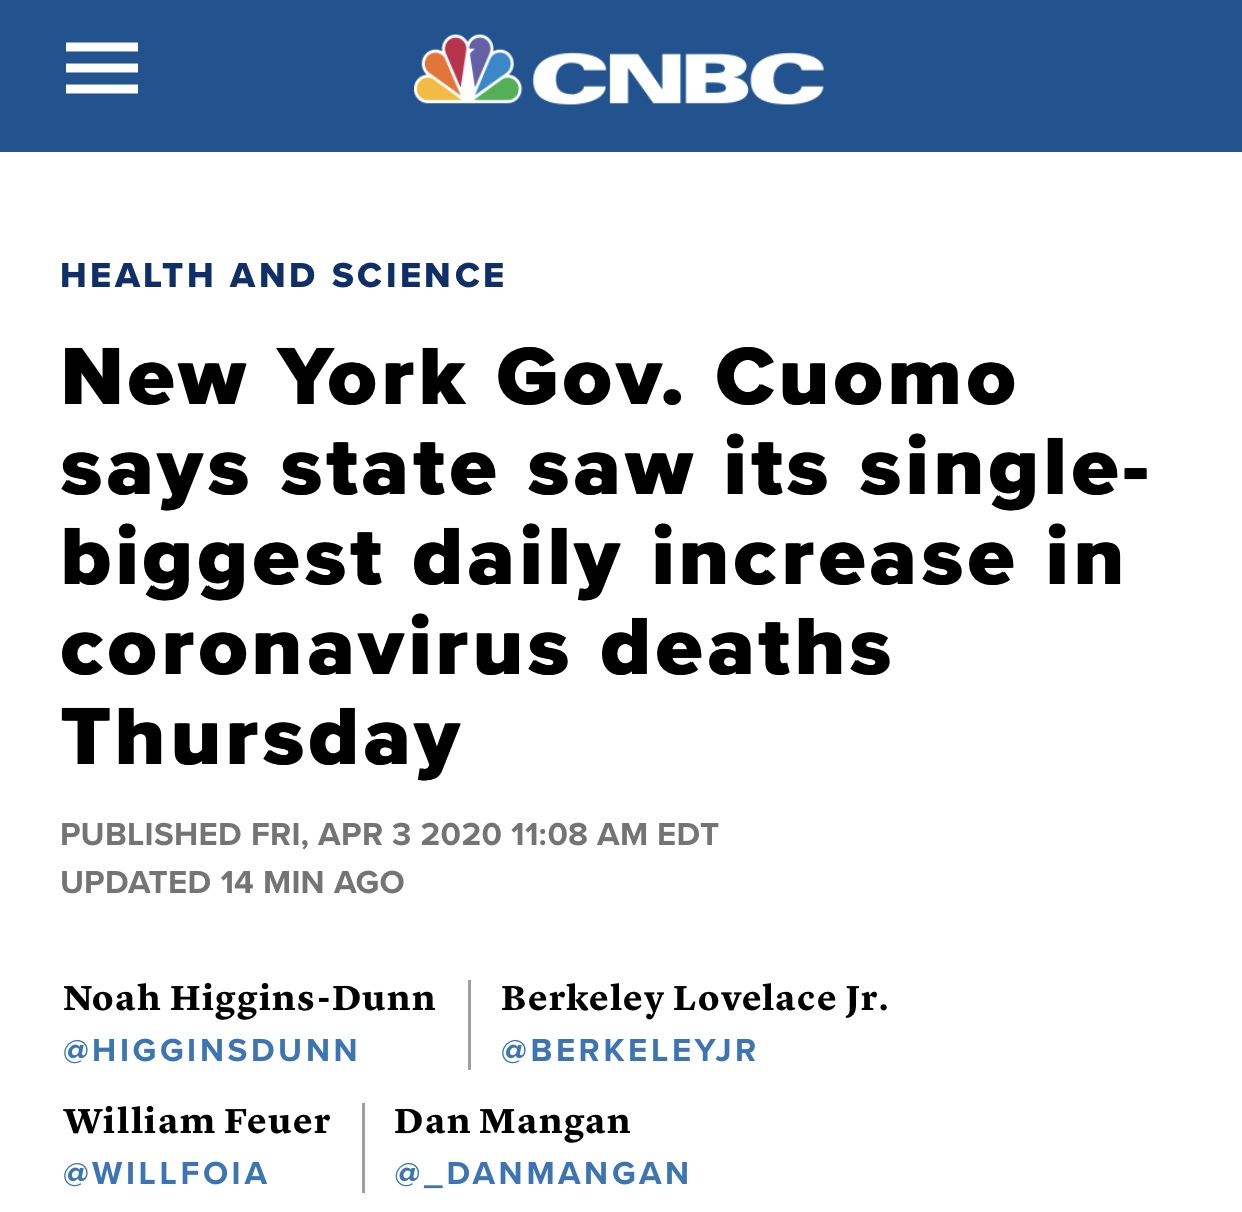 NY Governor Cuomo Says State Saw Its Biggest Daily Increase in Coronavirus Deaths Thursday